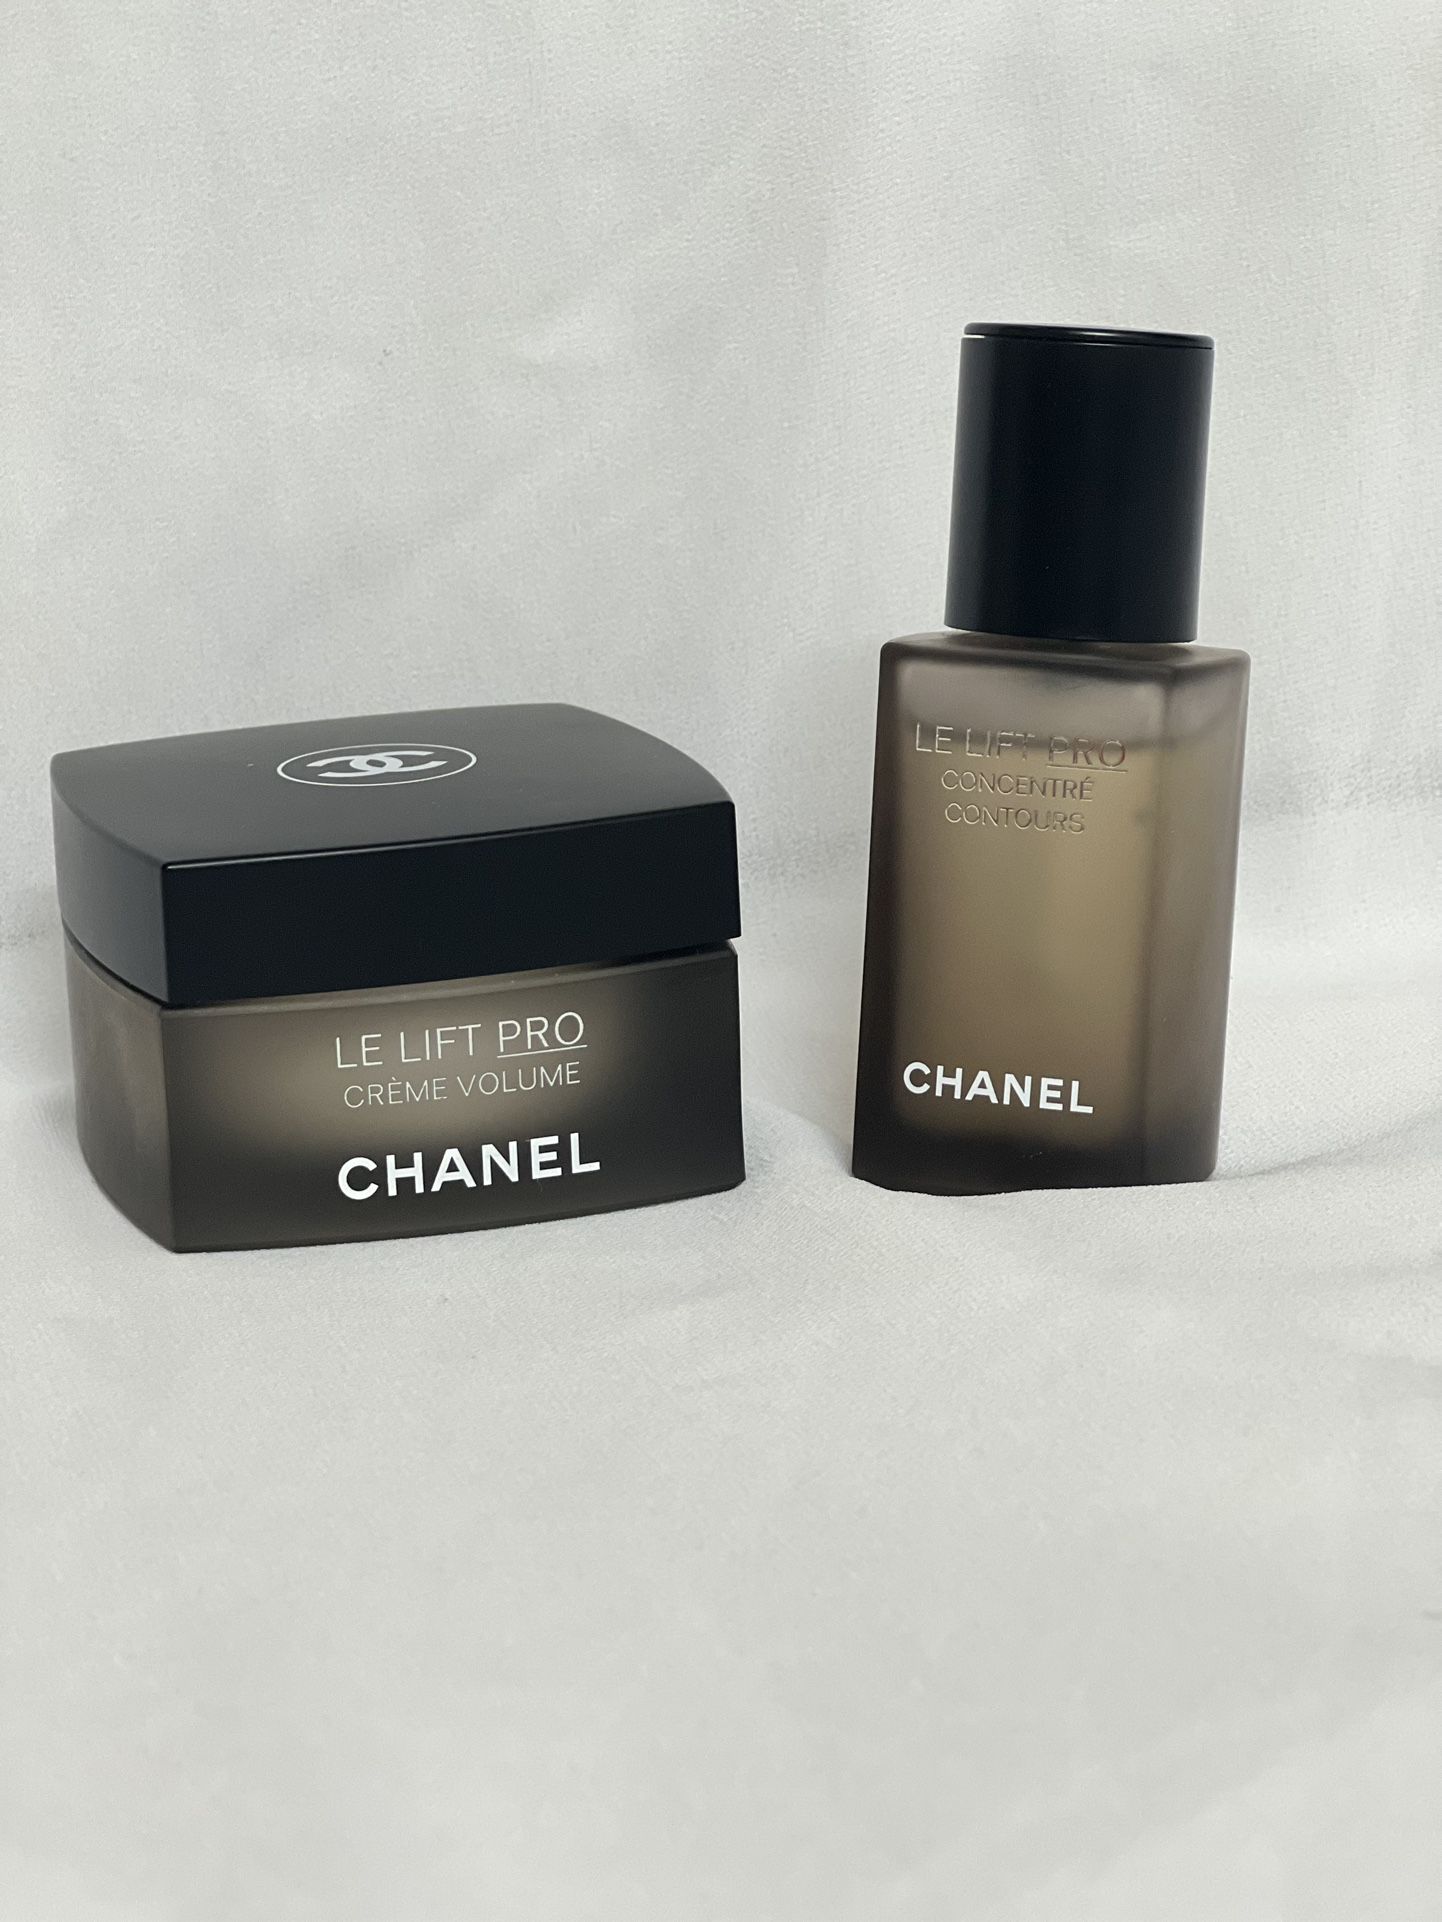 Chanel Le LIFT PRO for Sale in Queens, NY - OfferUp